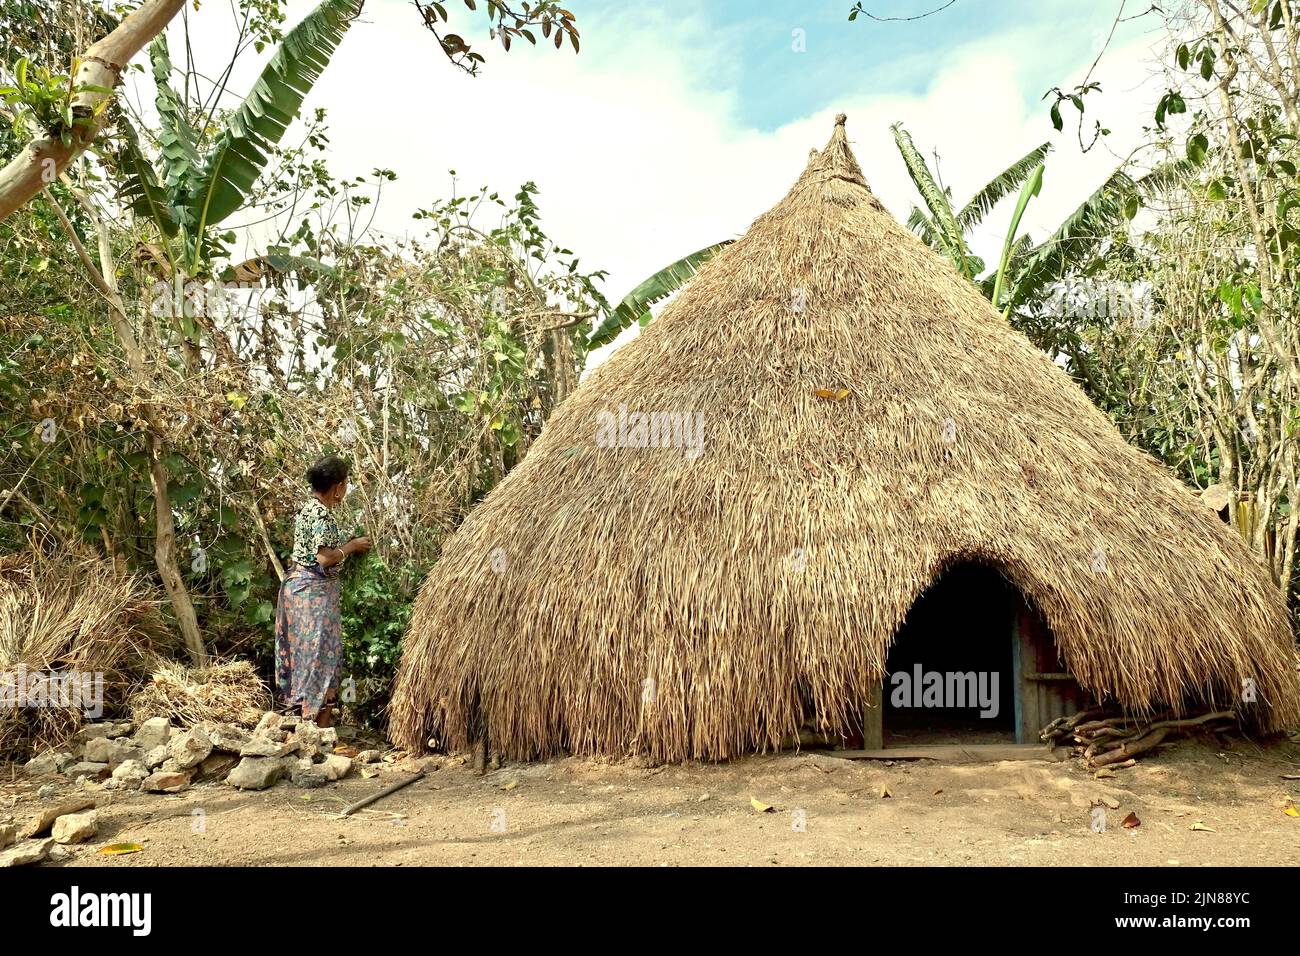 Yuliana Fuka, a villager and a part time ecotourism guide, is standing on the side of a thatched hut functioned as accommodation for tourist in Fatumnasi village, South Central Timor, East Nusa Tenggara, Indonesia. Stock Photo